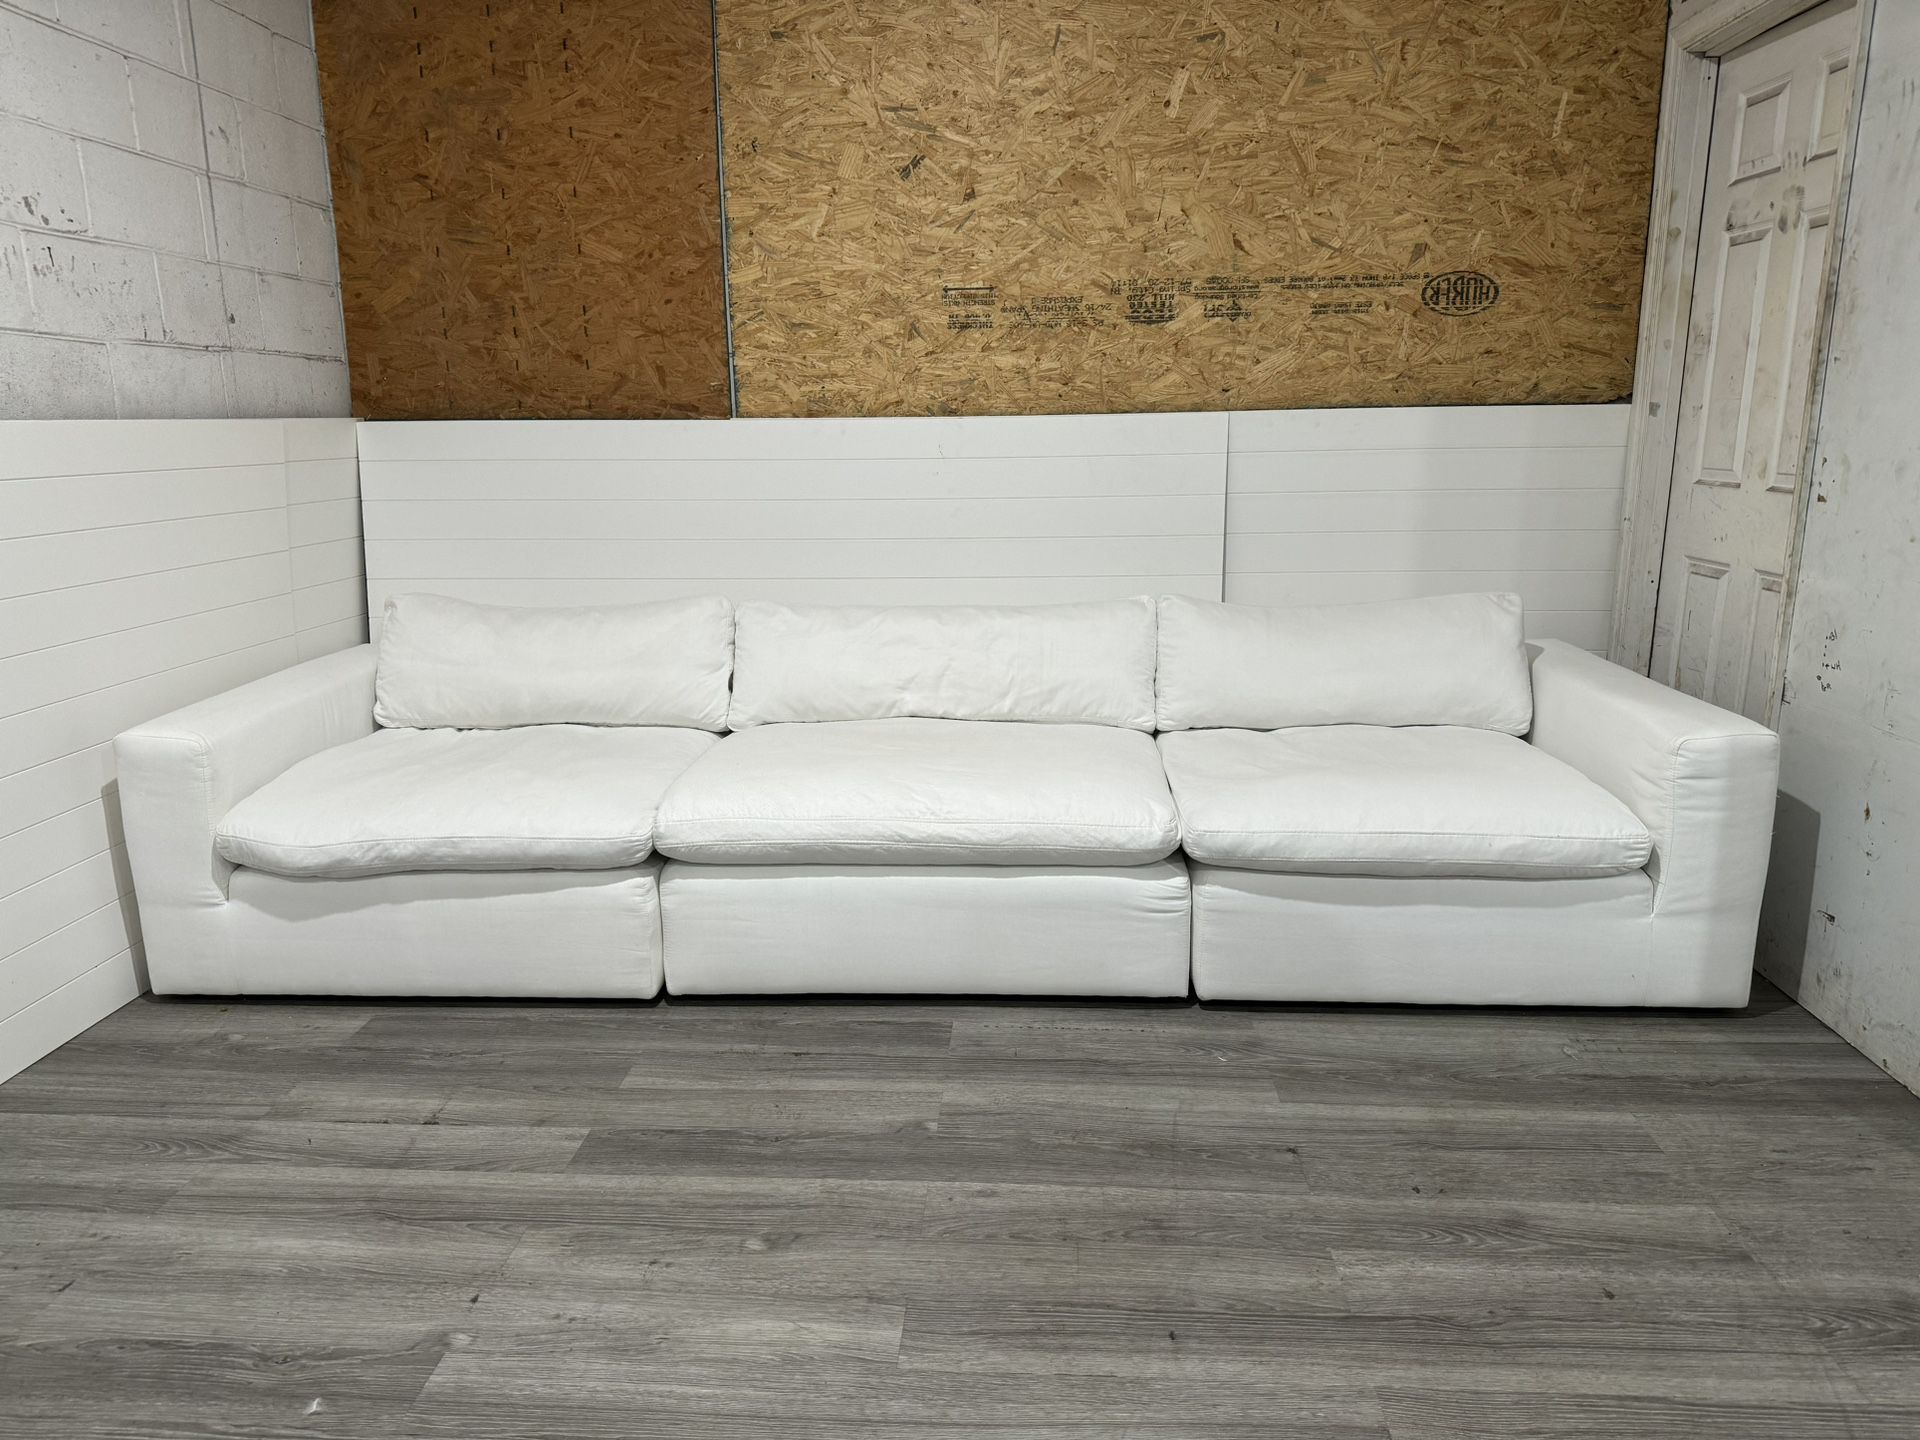 Modani Cloud Couch - FREE DELIVERY